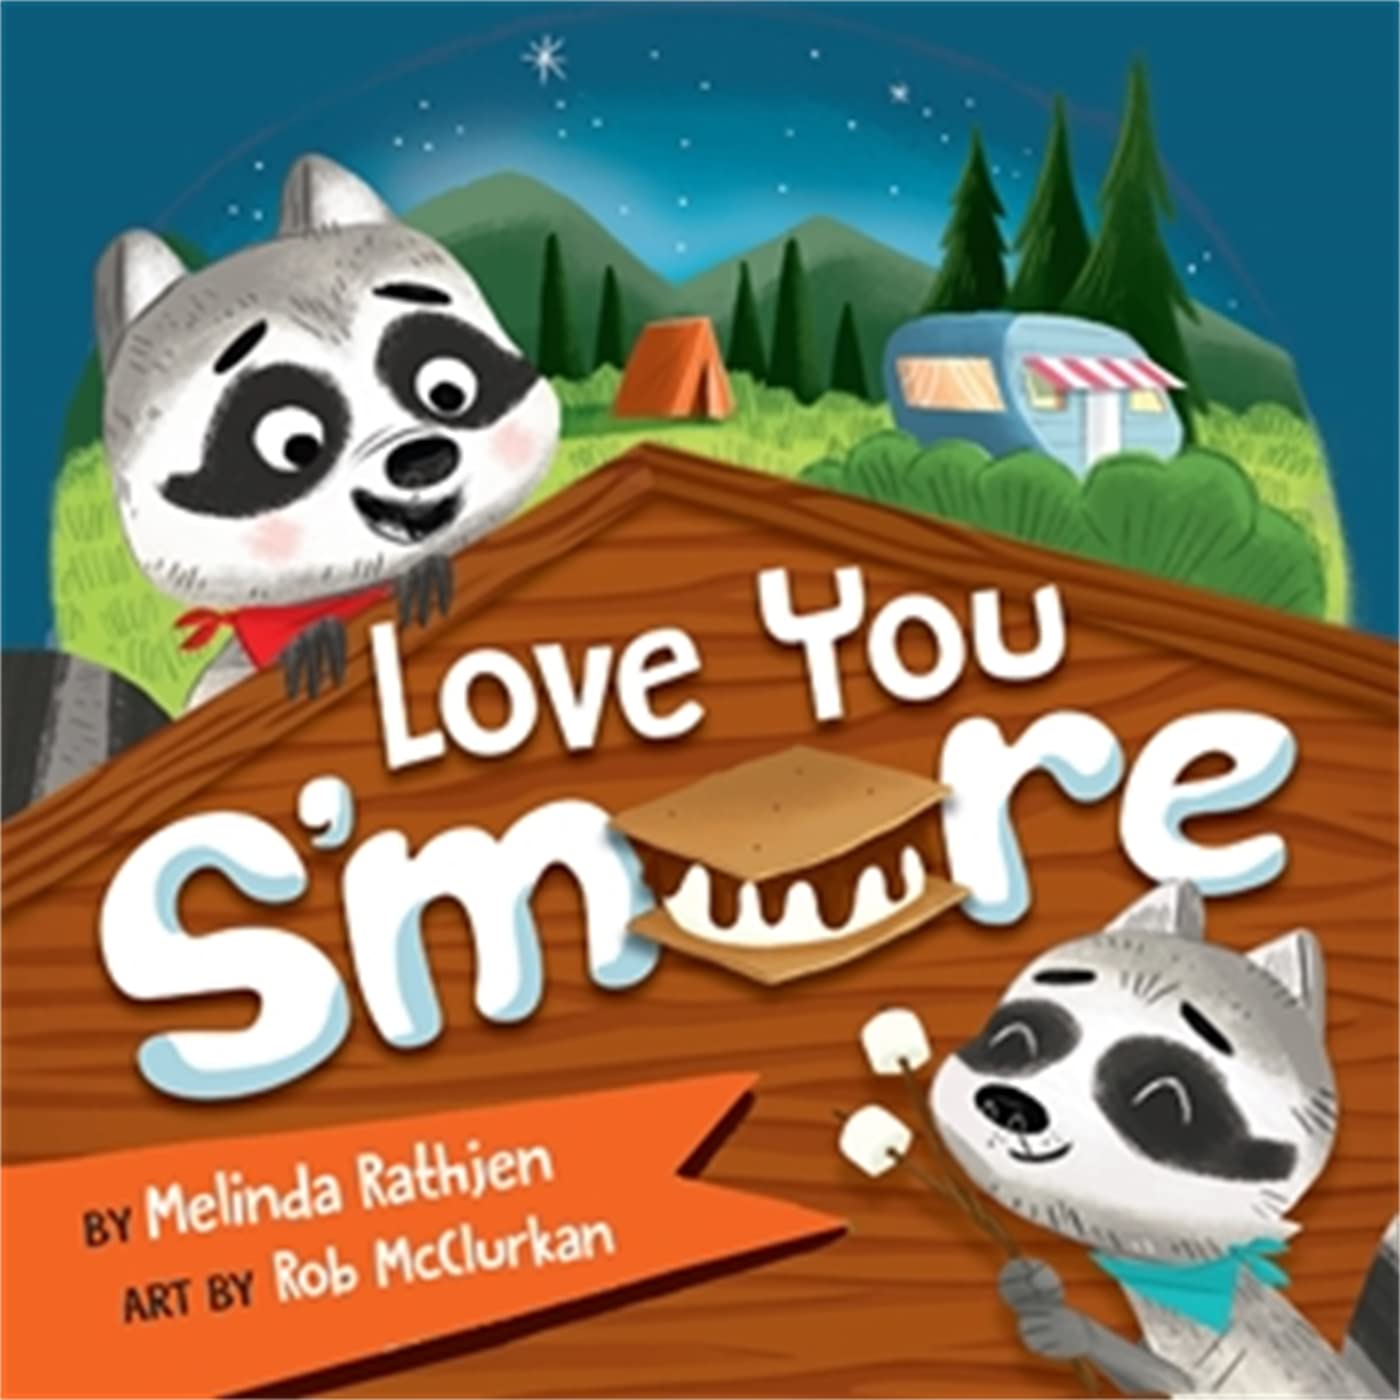 Hachette Book Group: Love You S'more-HACHETTE BOOK GROUP USA-Little Giant Kidz